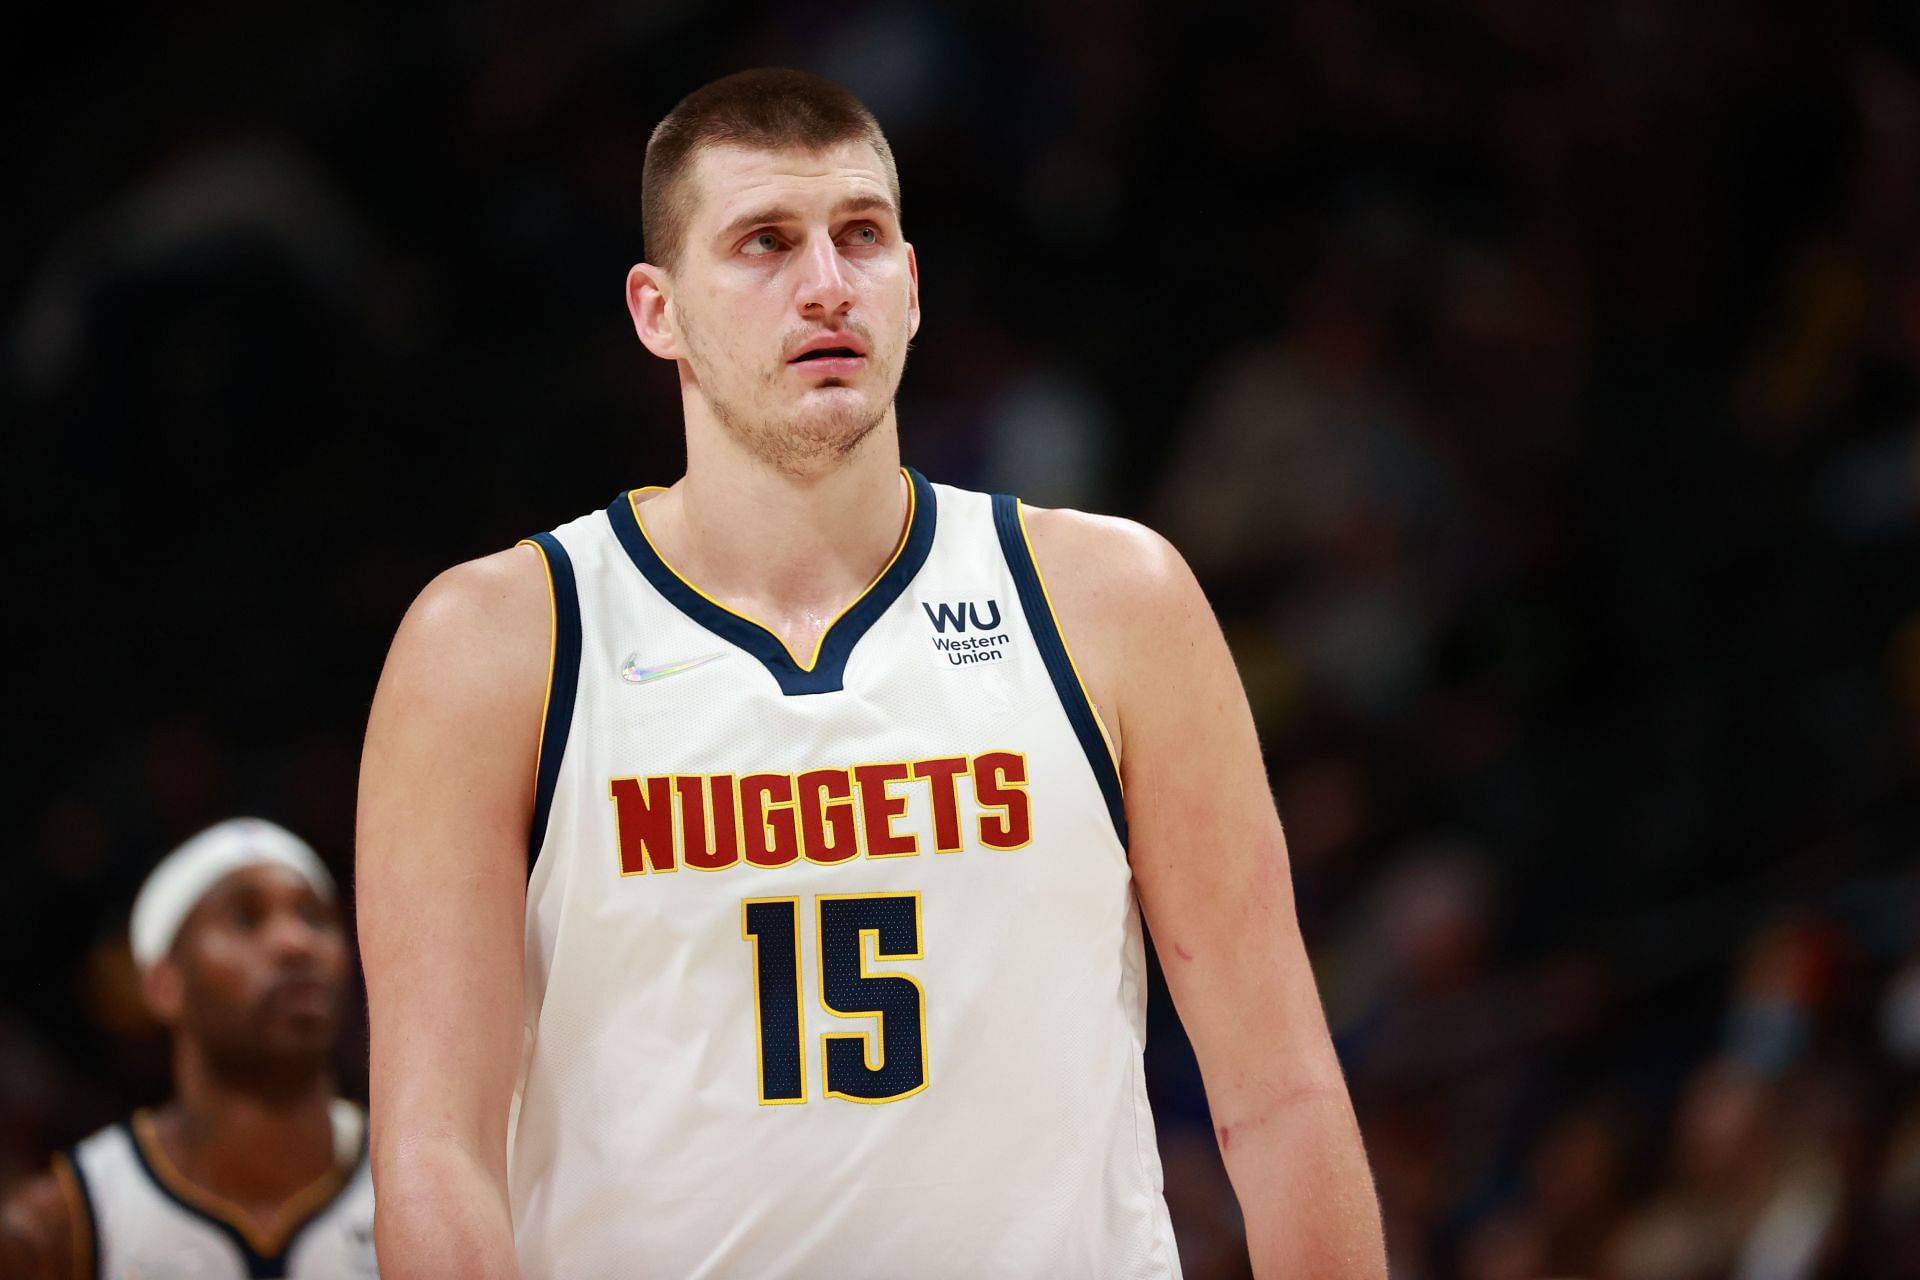 “The outlier of this season has been Jokic” – Bill Simmons makes the case for Nikola Jokic to win back-to-back MVPs